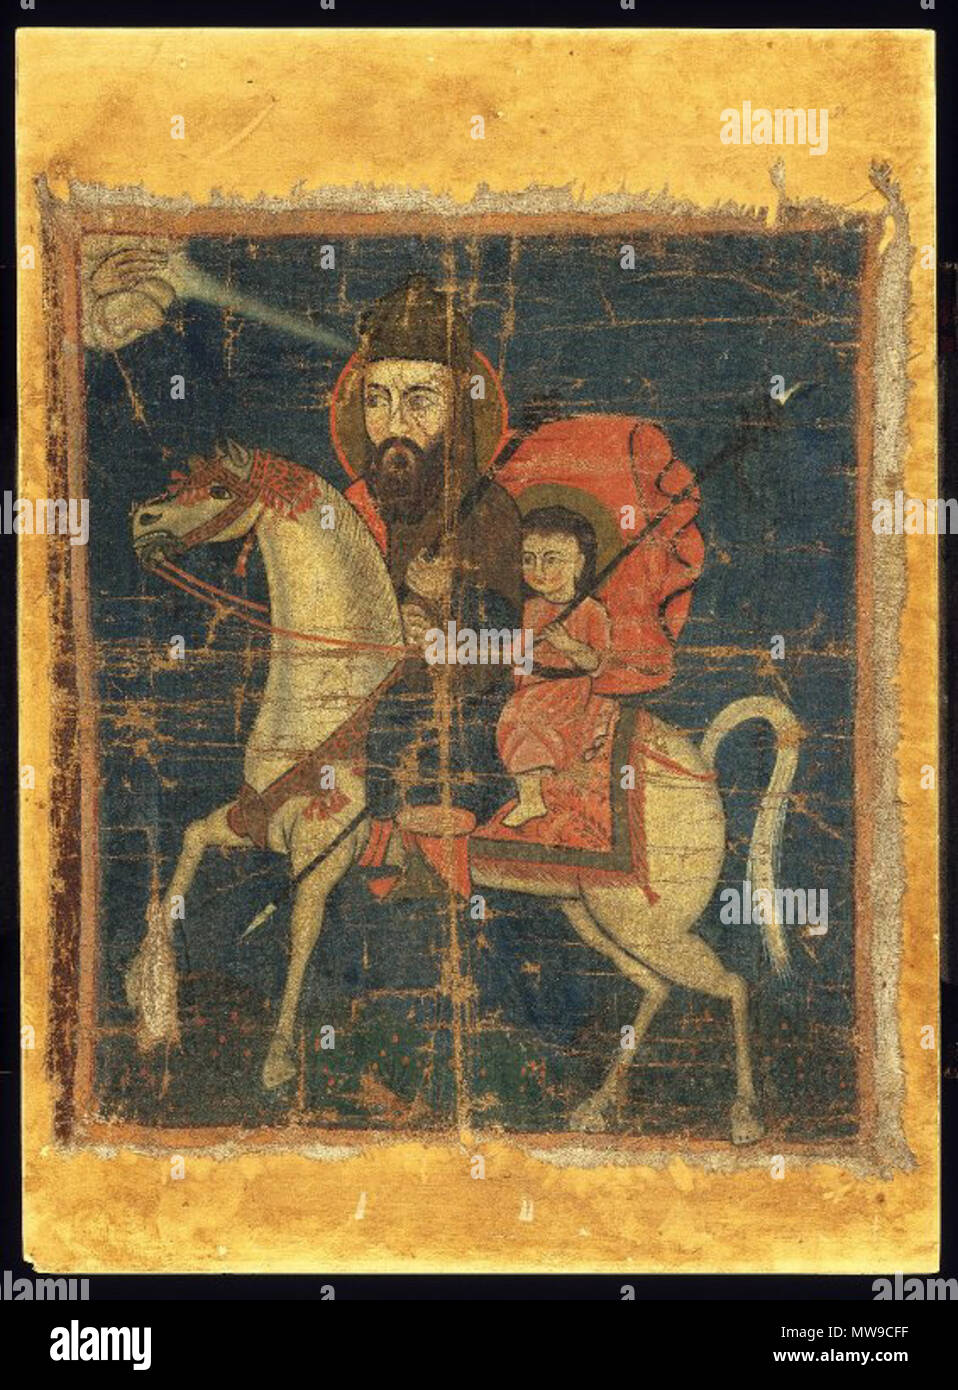 . Man and Child Mounted on Horse say the Museum - in fact an icon of St George of a well-known type, like File:Saint George icon in Pyrgos, Santorini.jpg . between 1700 and 1899  100 Brooklyn Museum - Man and Child Mounted on Horse Stock Photo